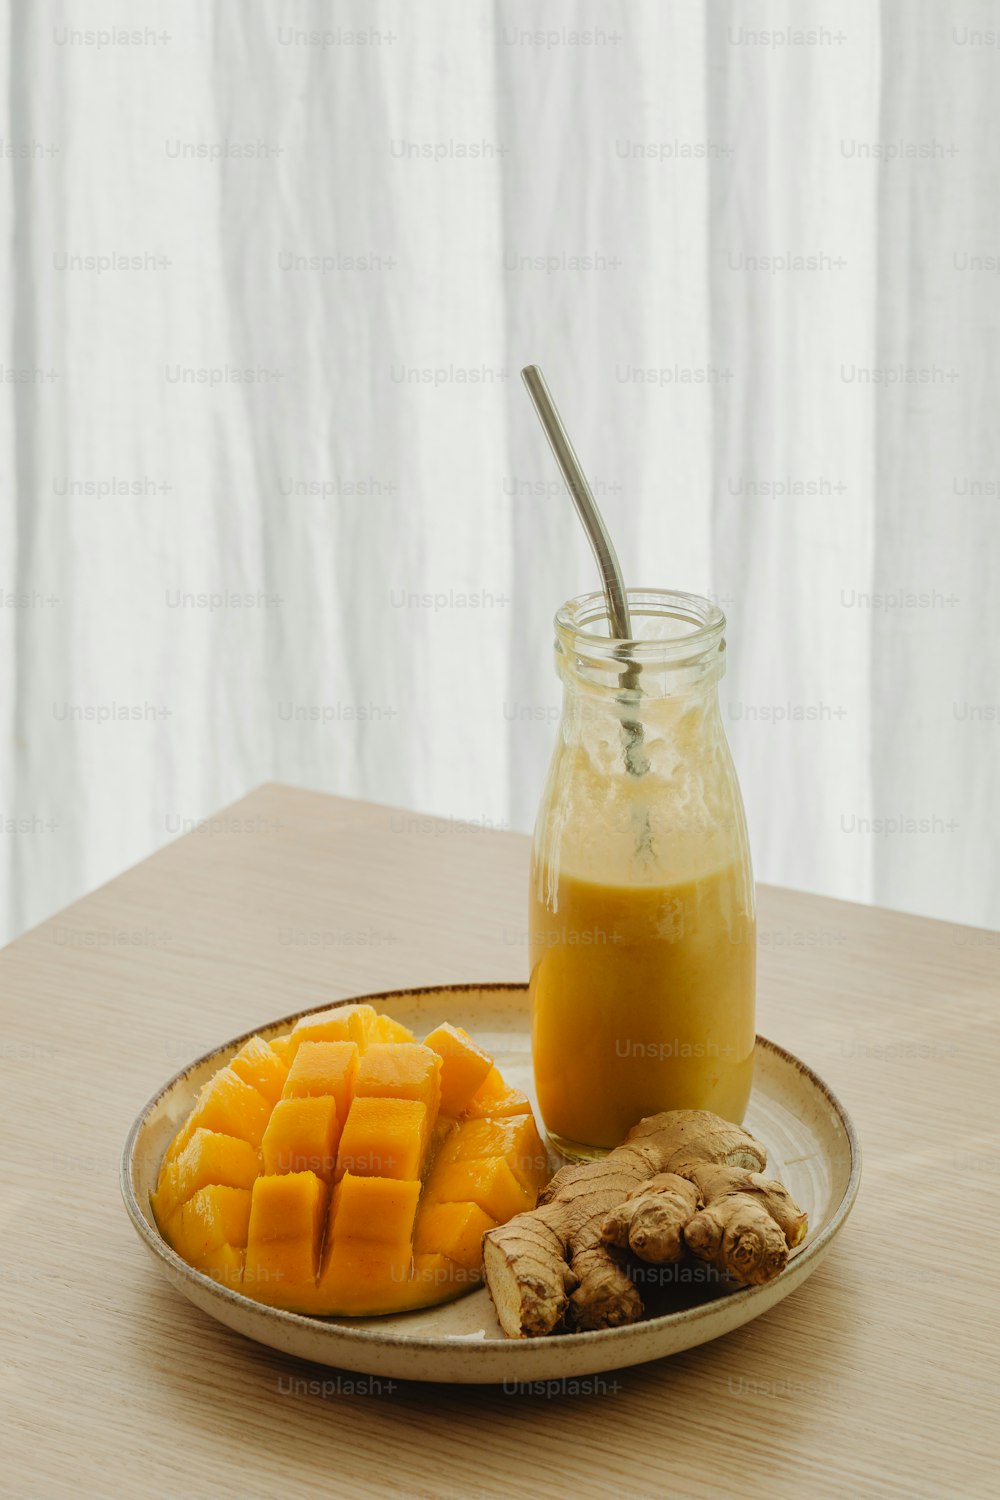 a glass of orange juice next to sliced mangoes and ginger on a plate